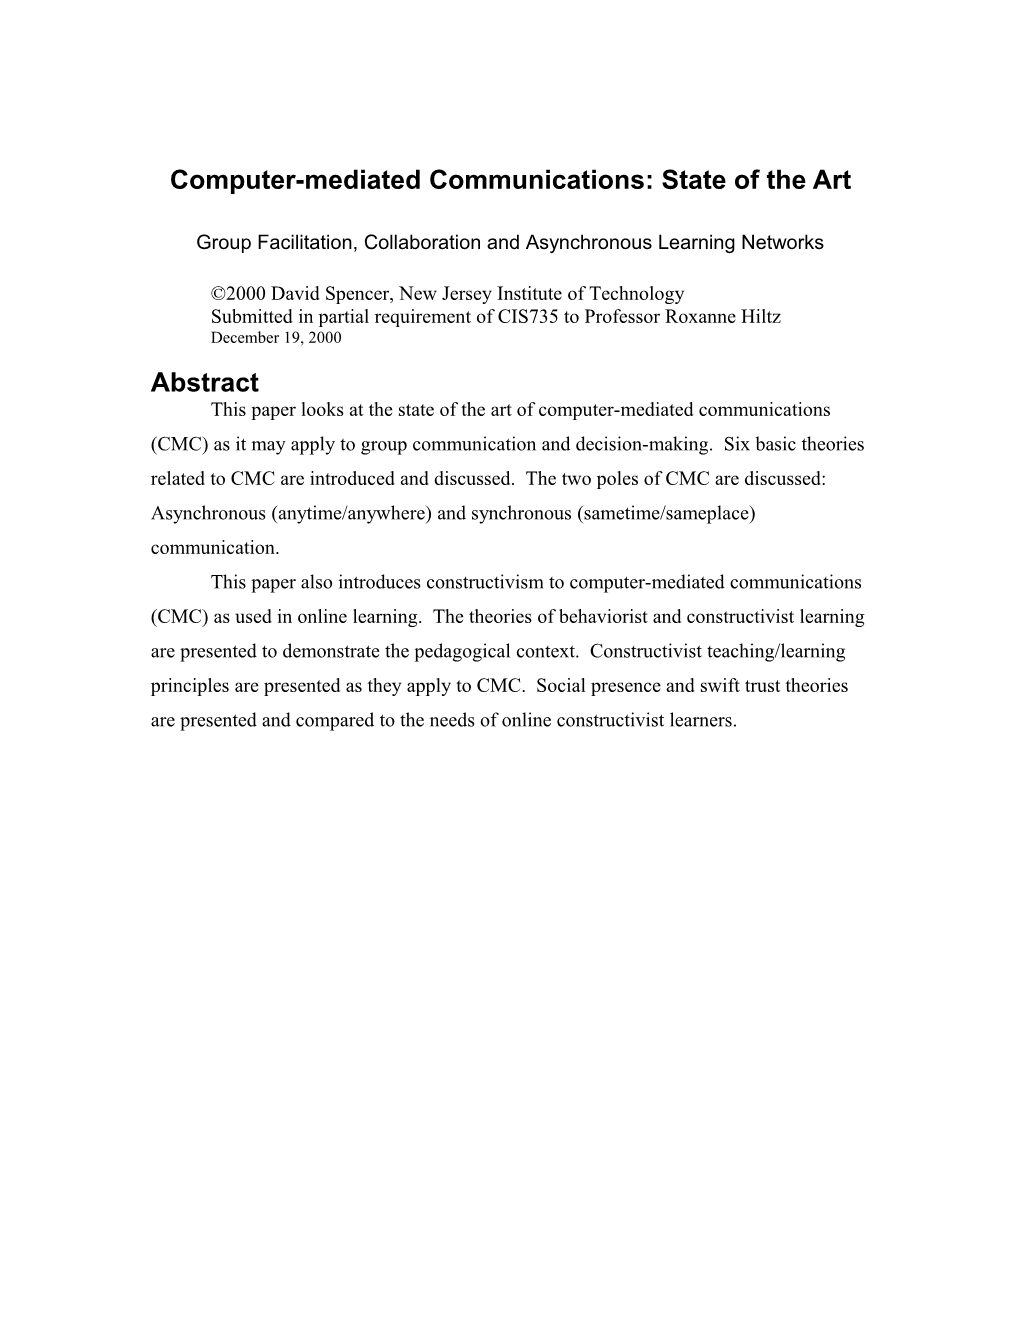 Computer-Mediated Communications: Constructivism Through Social Presence and Swift Trust